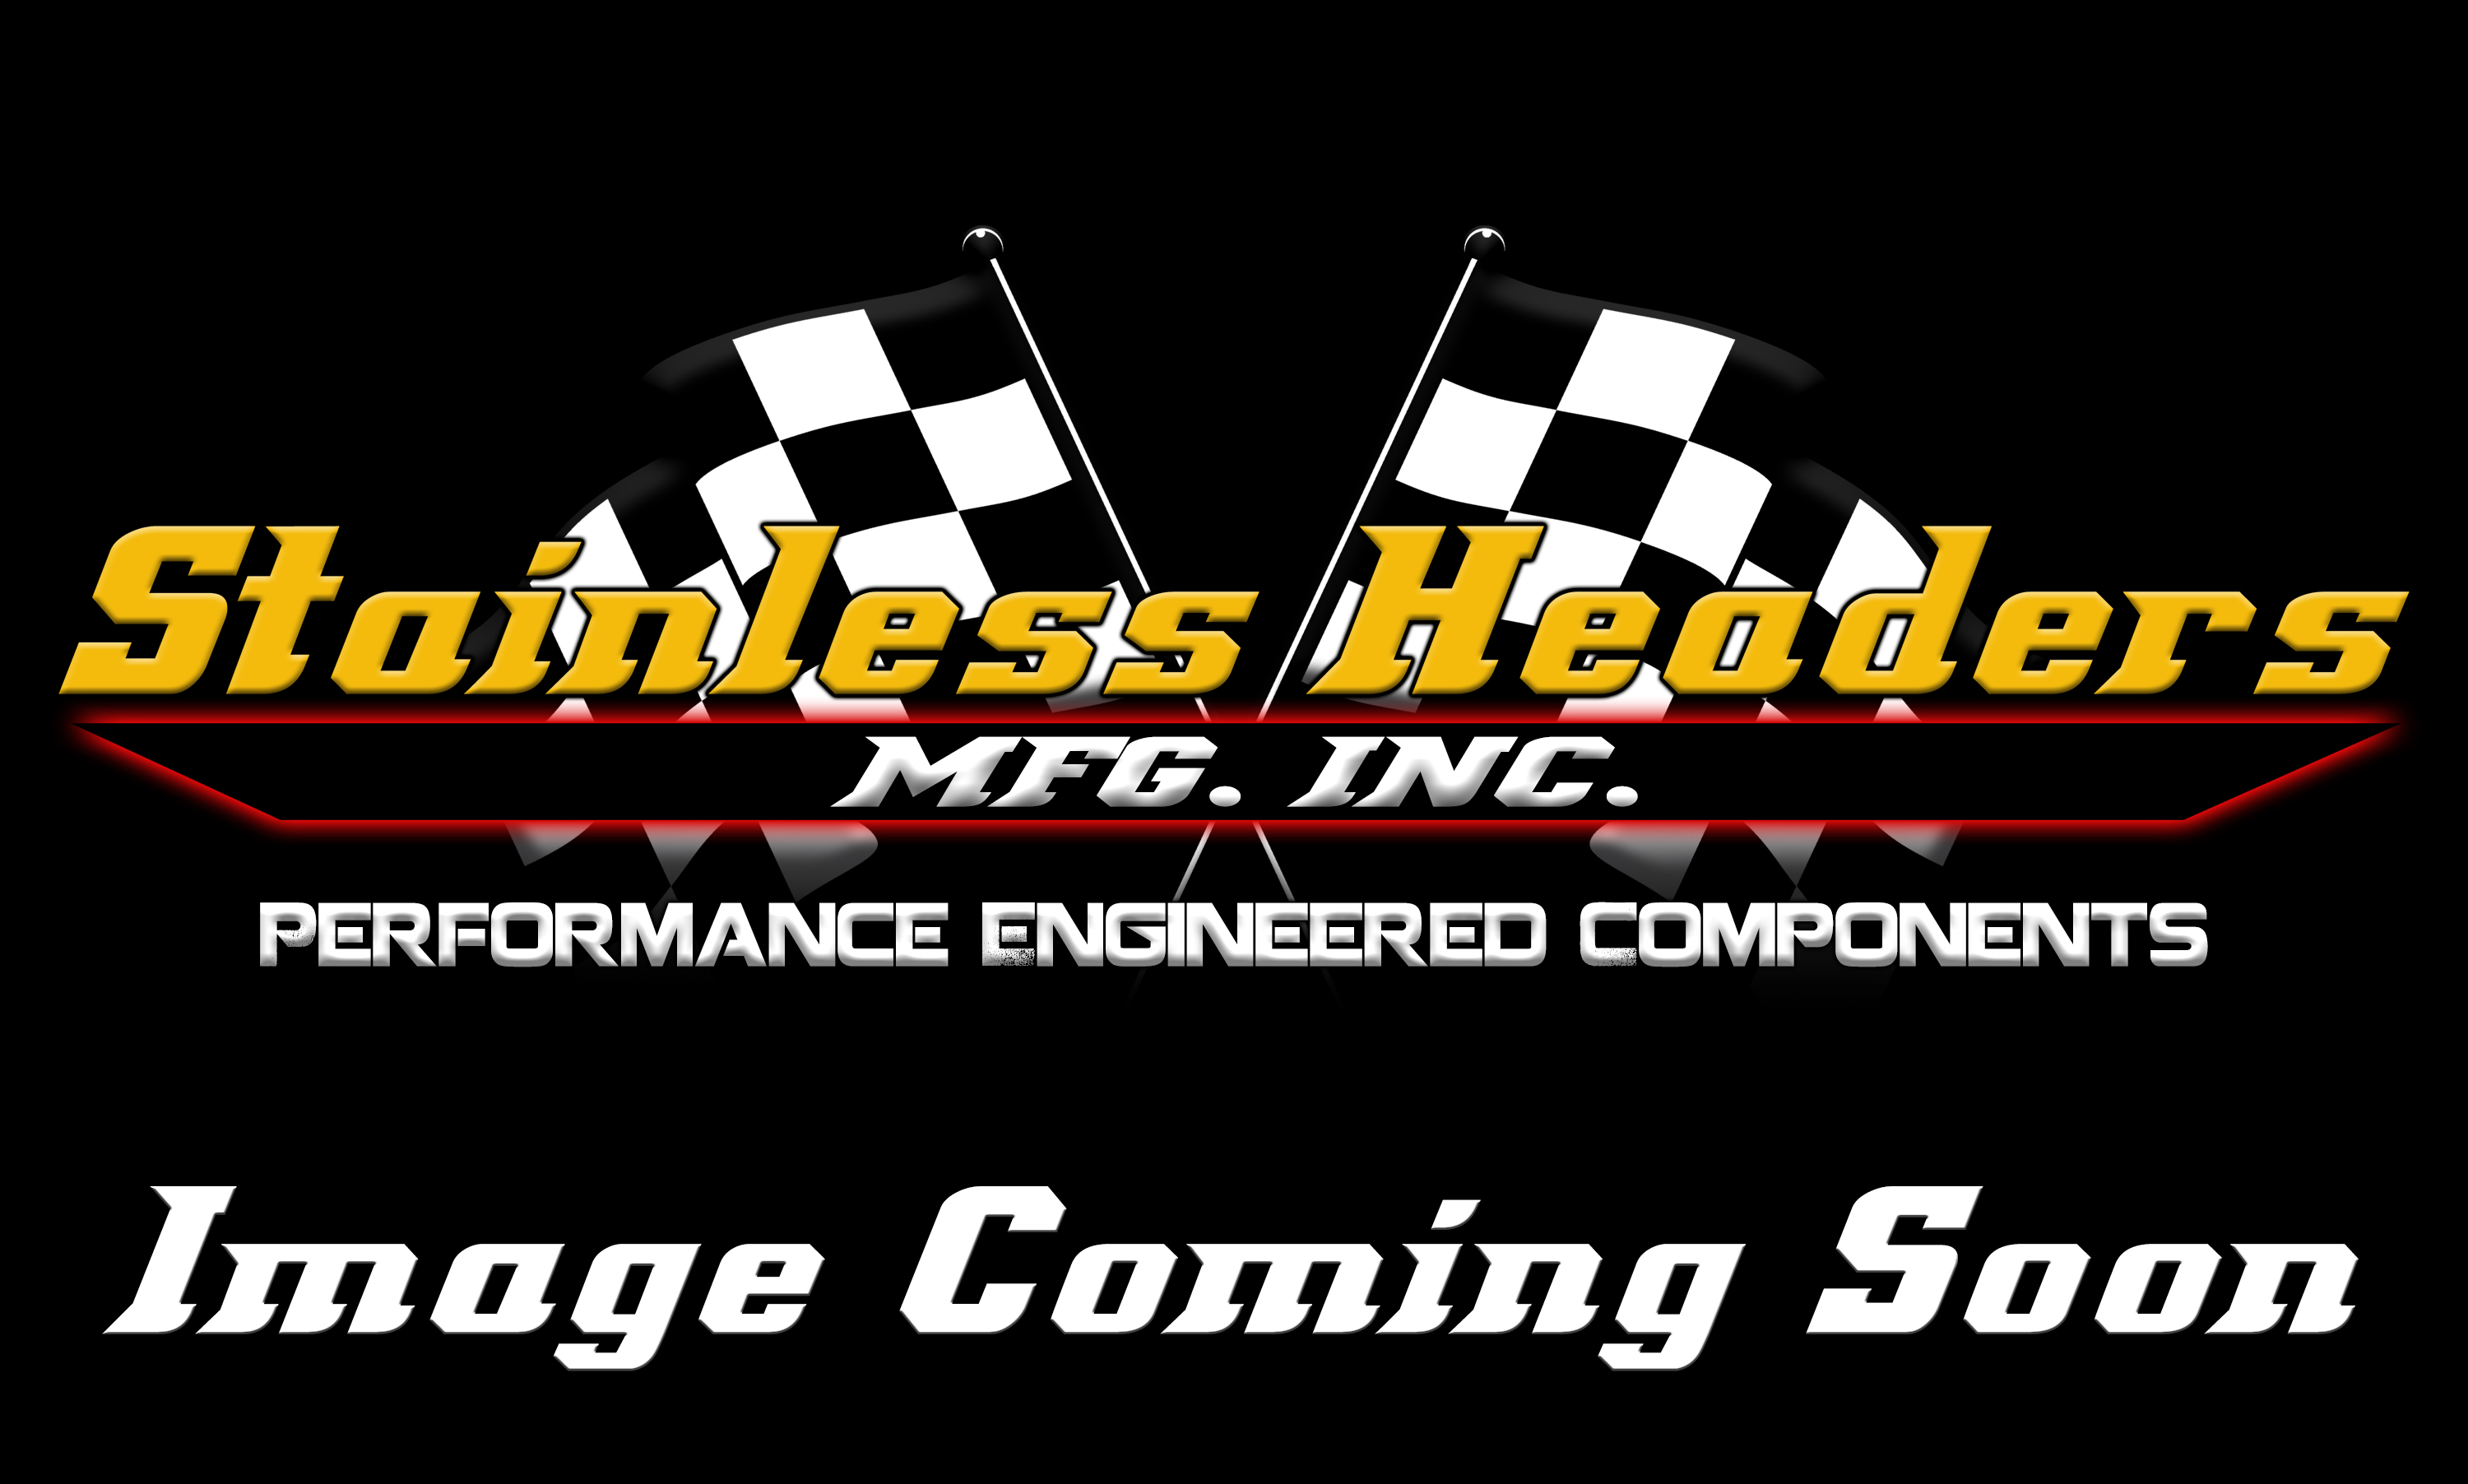 Stainless Headers - 2 1/2" Primary 6 into 1 Performance Merge Collector-16ga 304ss